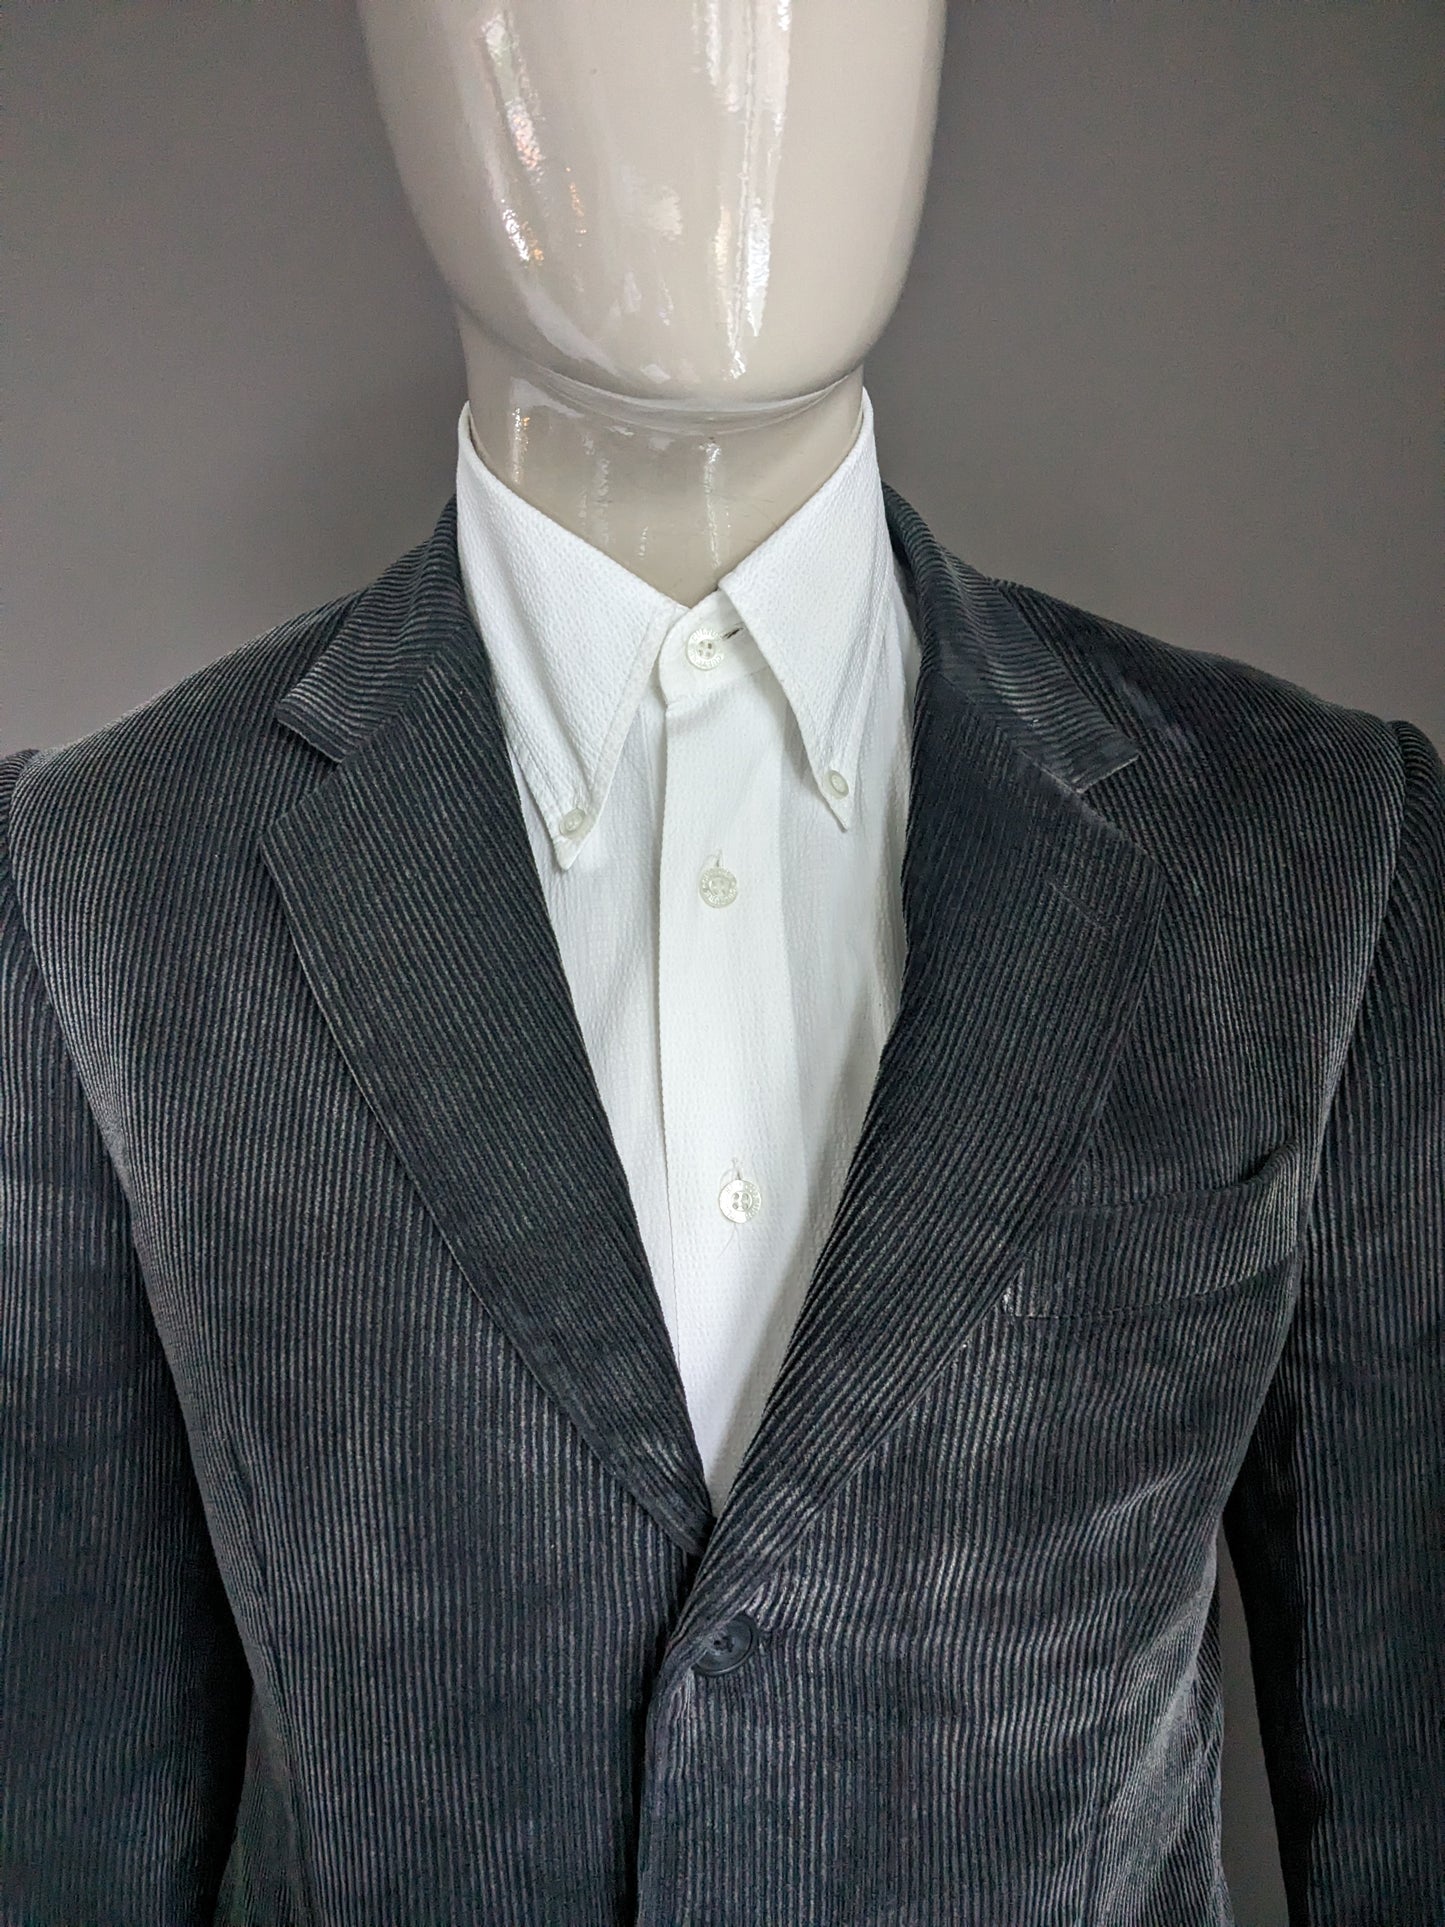 Vintage Angelo Litrico Rib Colbert. Color gris oscuro. Talla L.